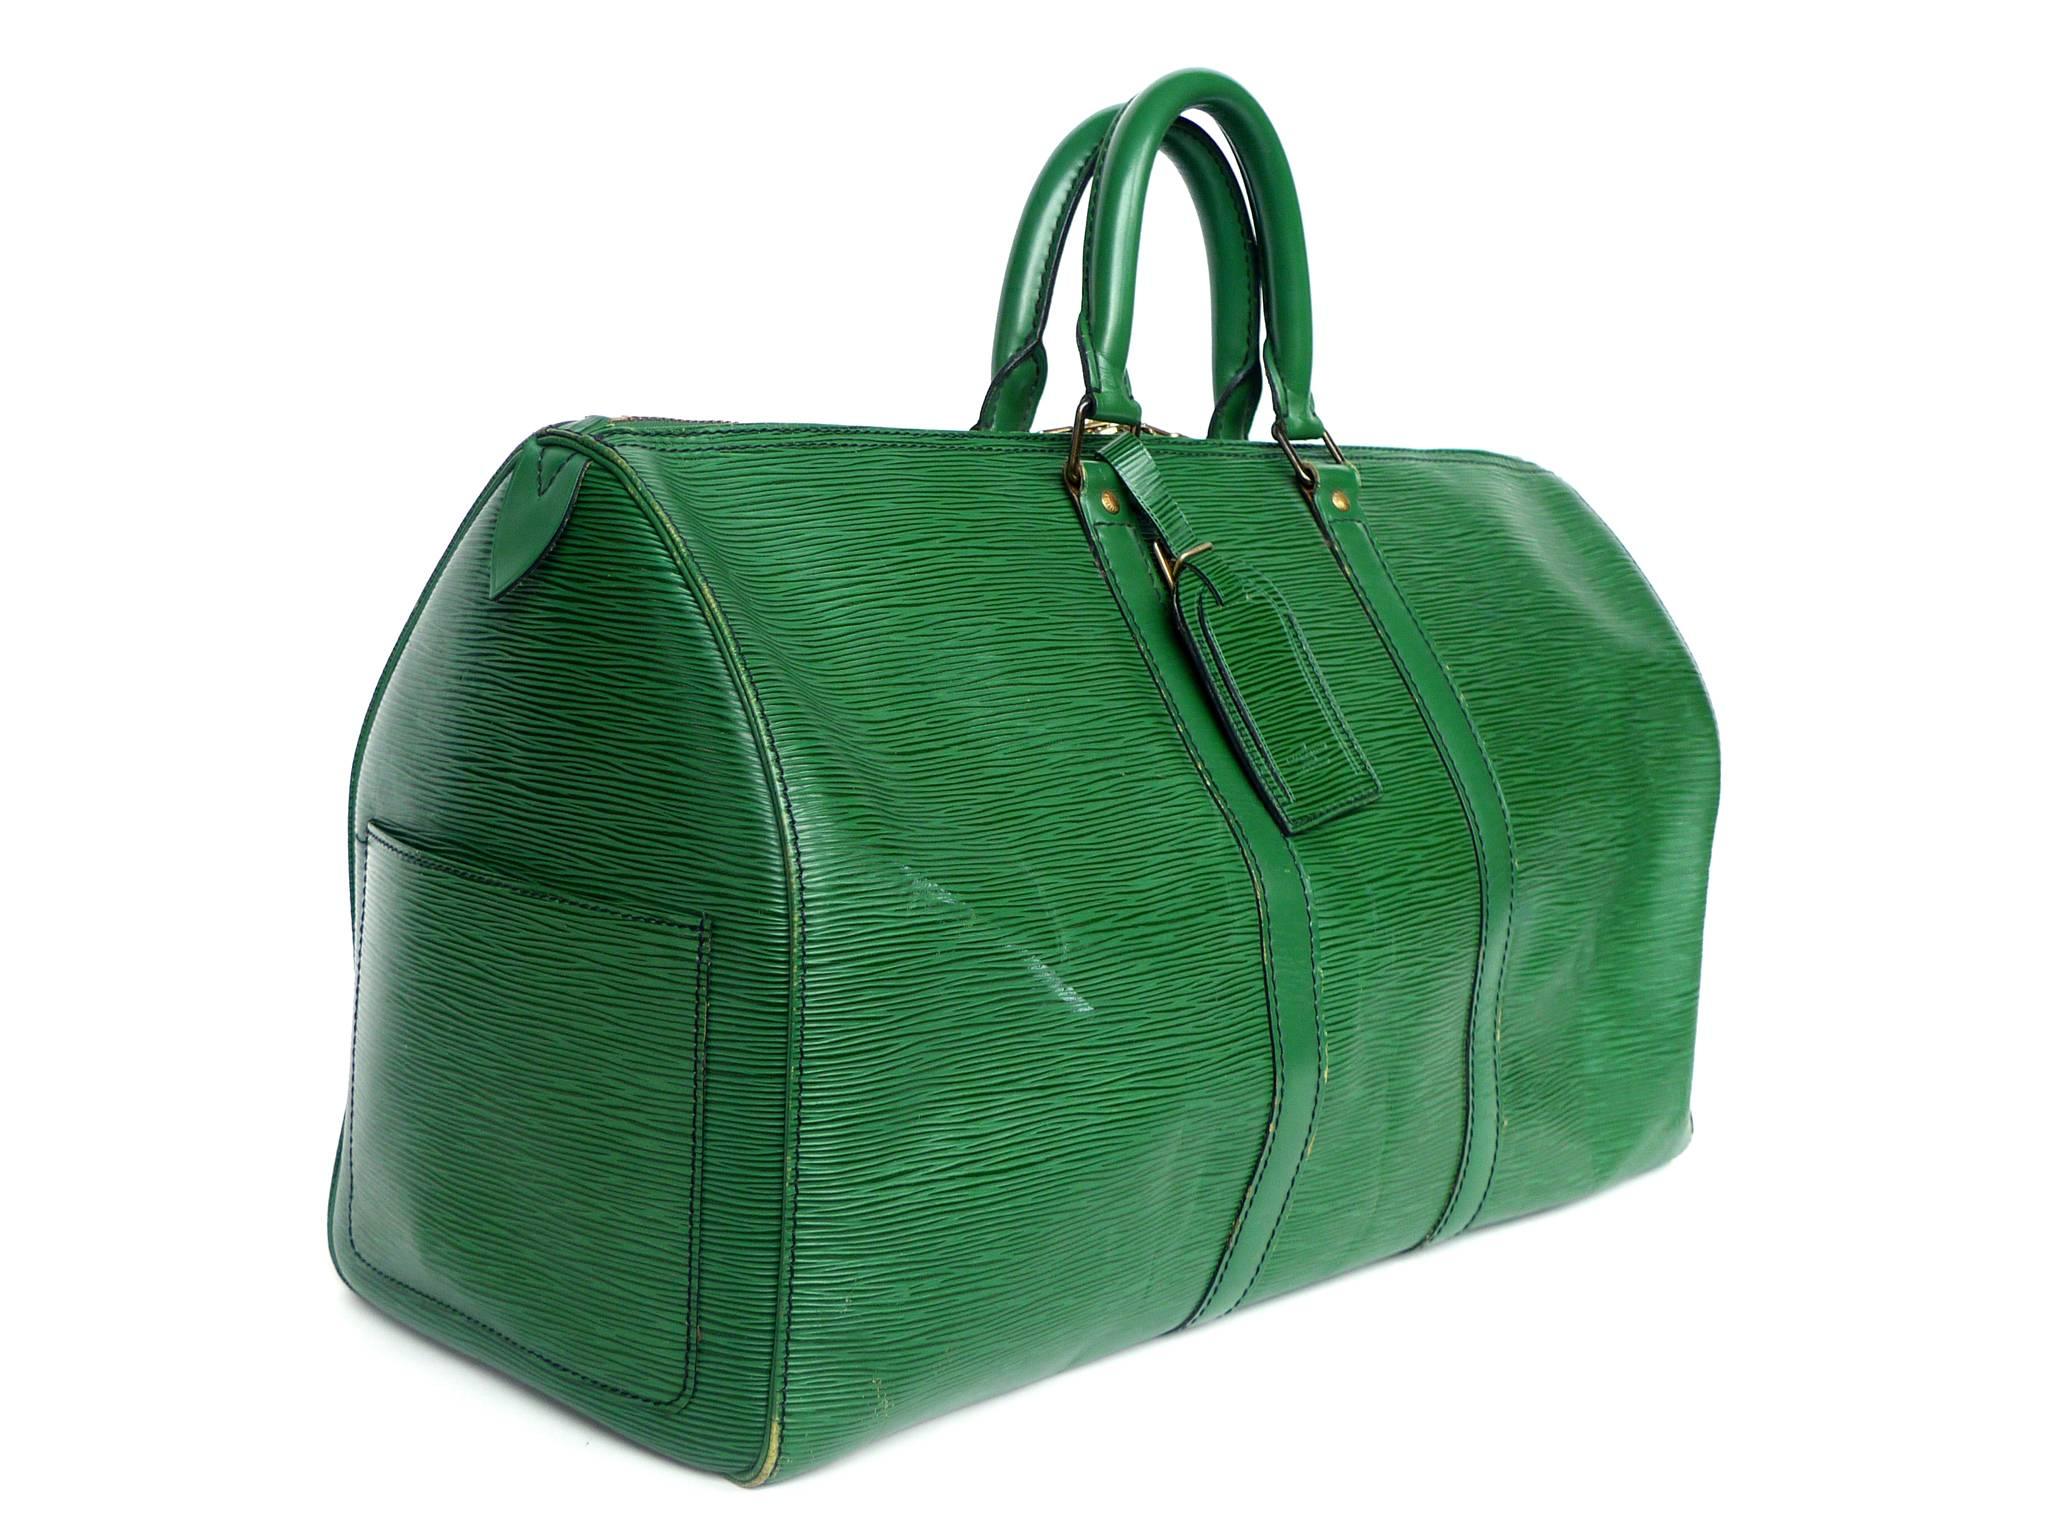 French Louis Vuitton Green Epi Leather Keepall 45 Travel Bag